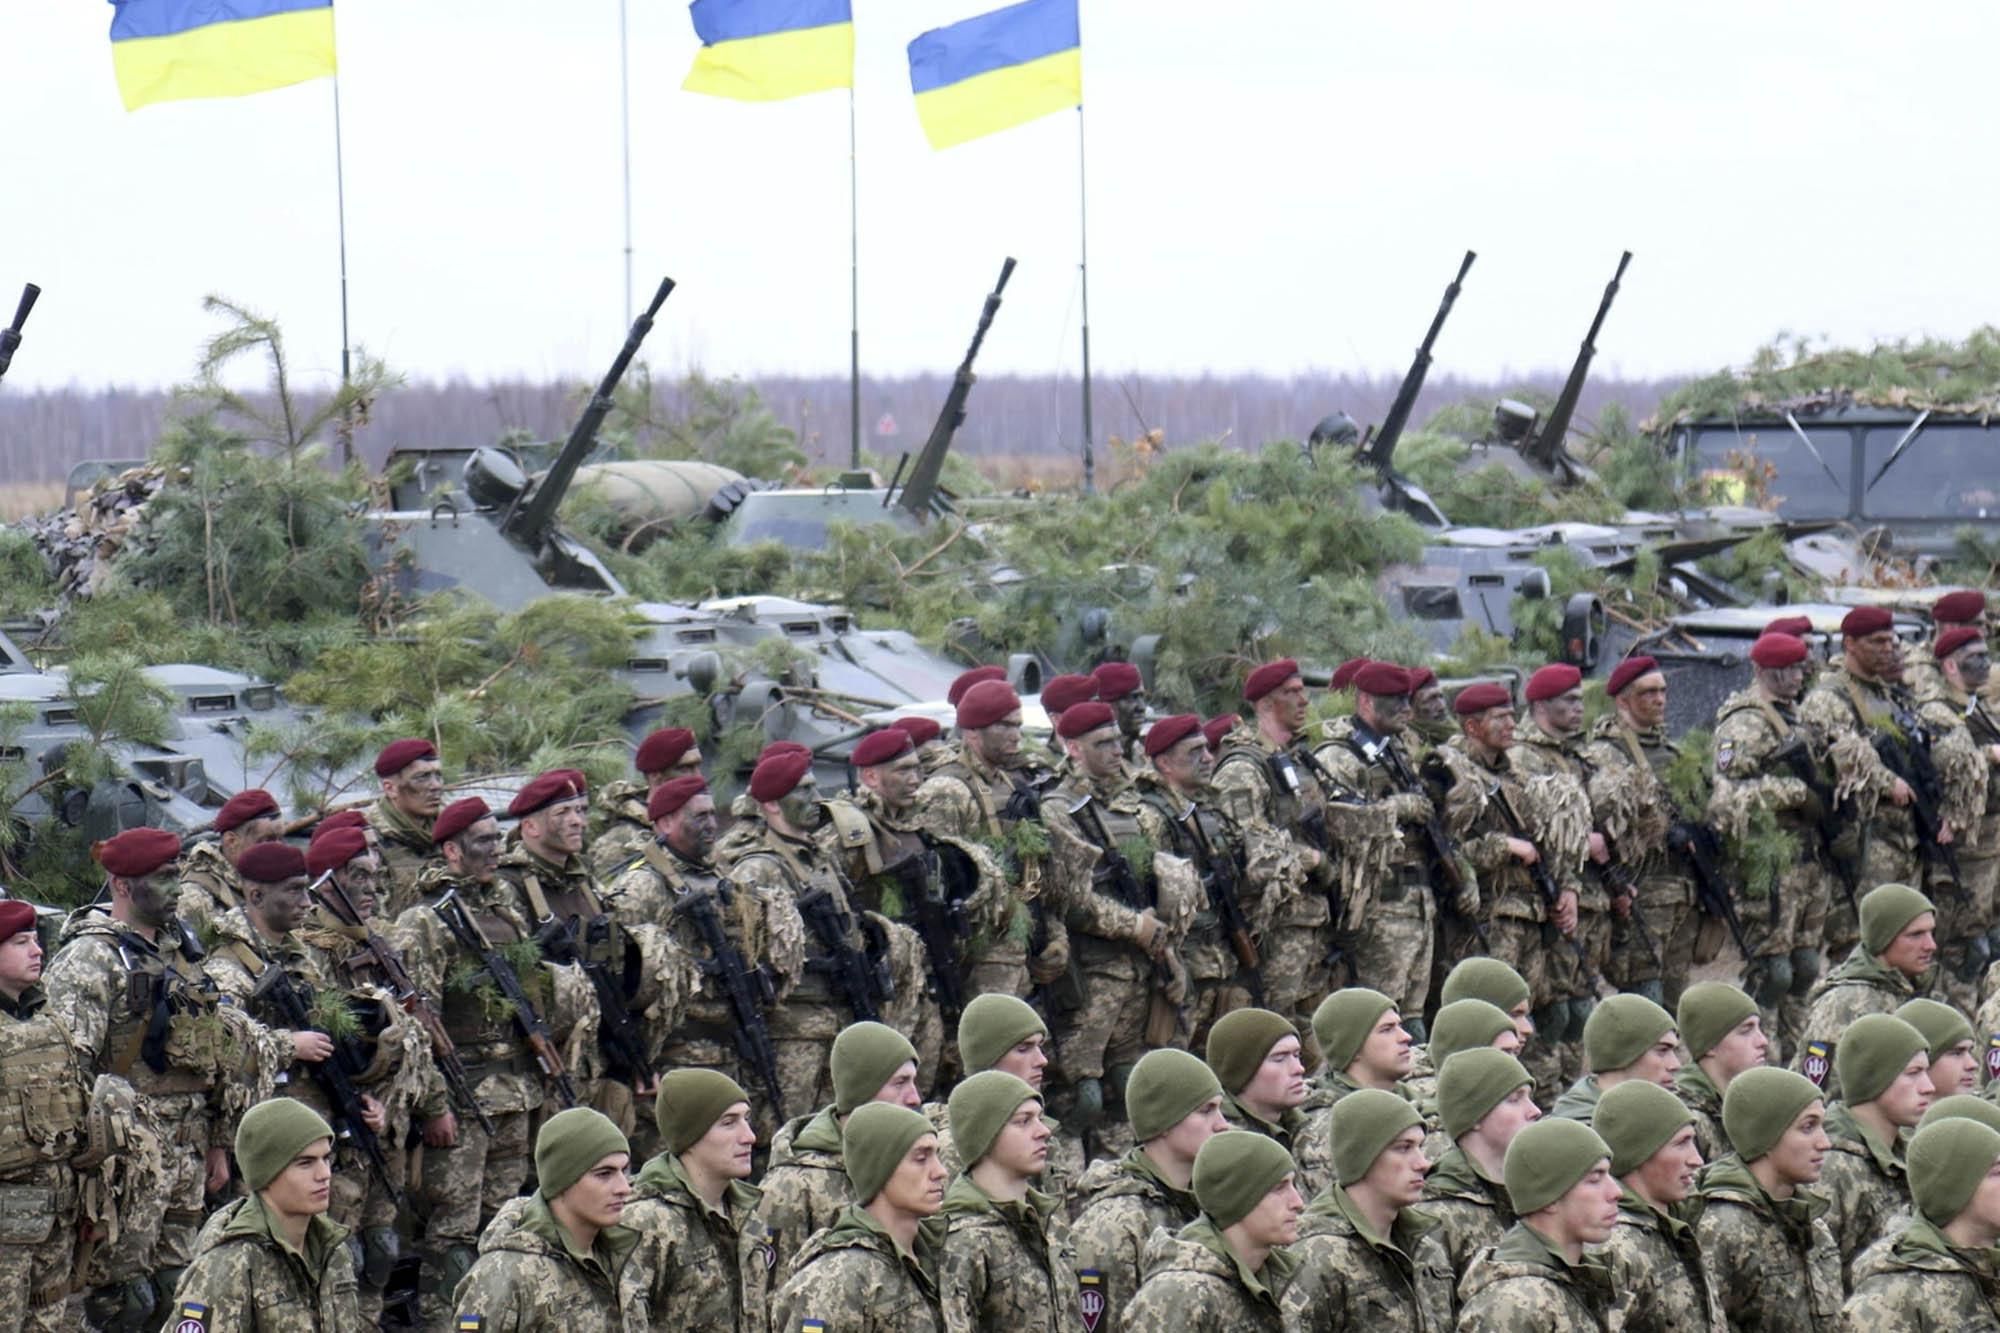 Ukraine: A Ticking Bomb About To Explode Into A Global War